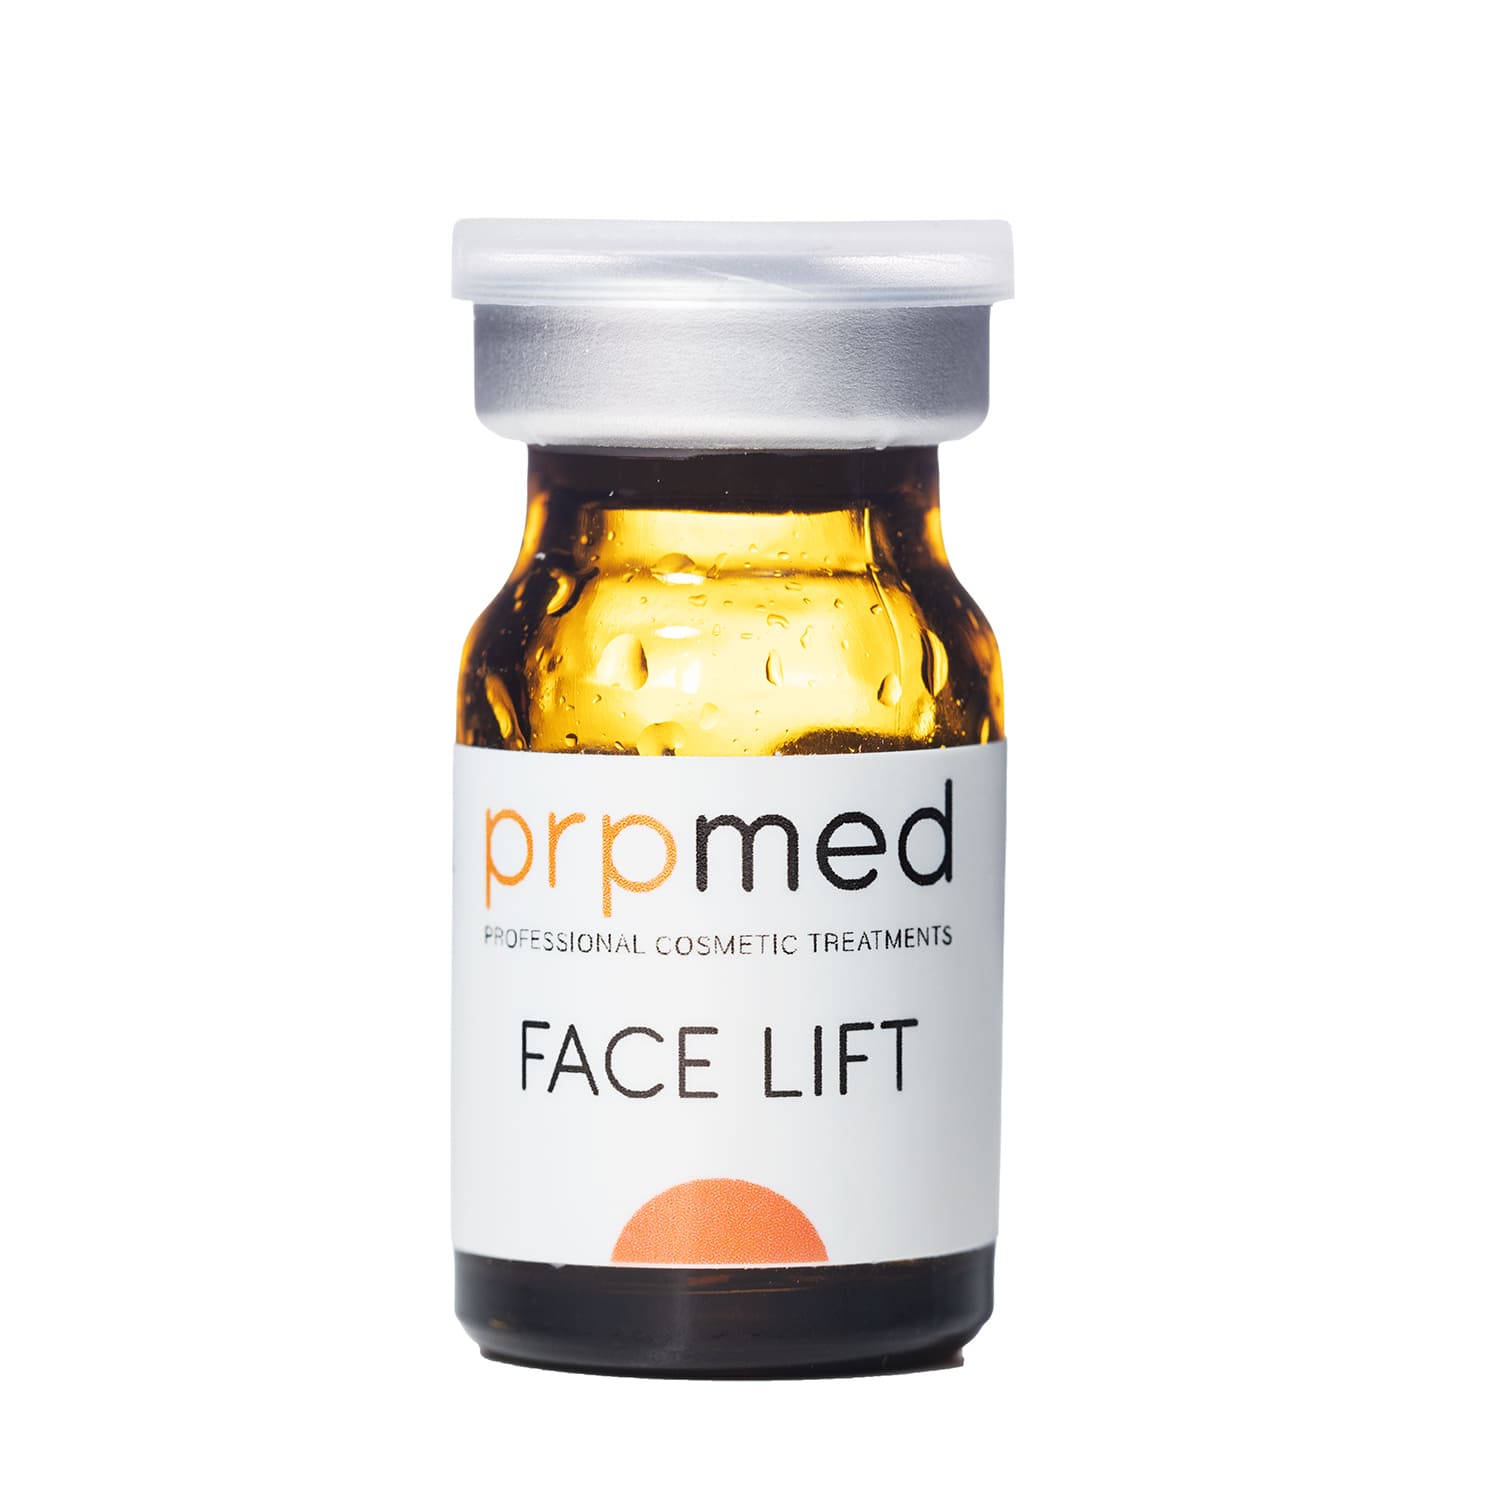 Face Lift - The alternative Microneedling to Serum - natural